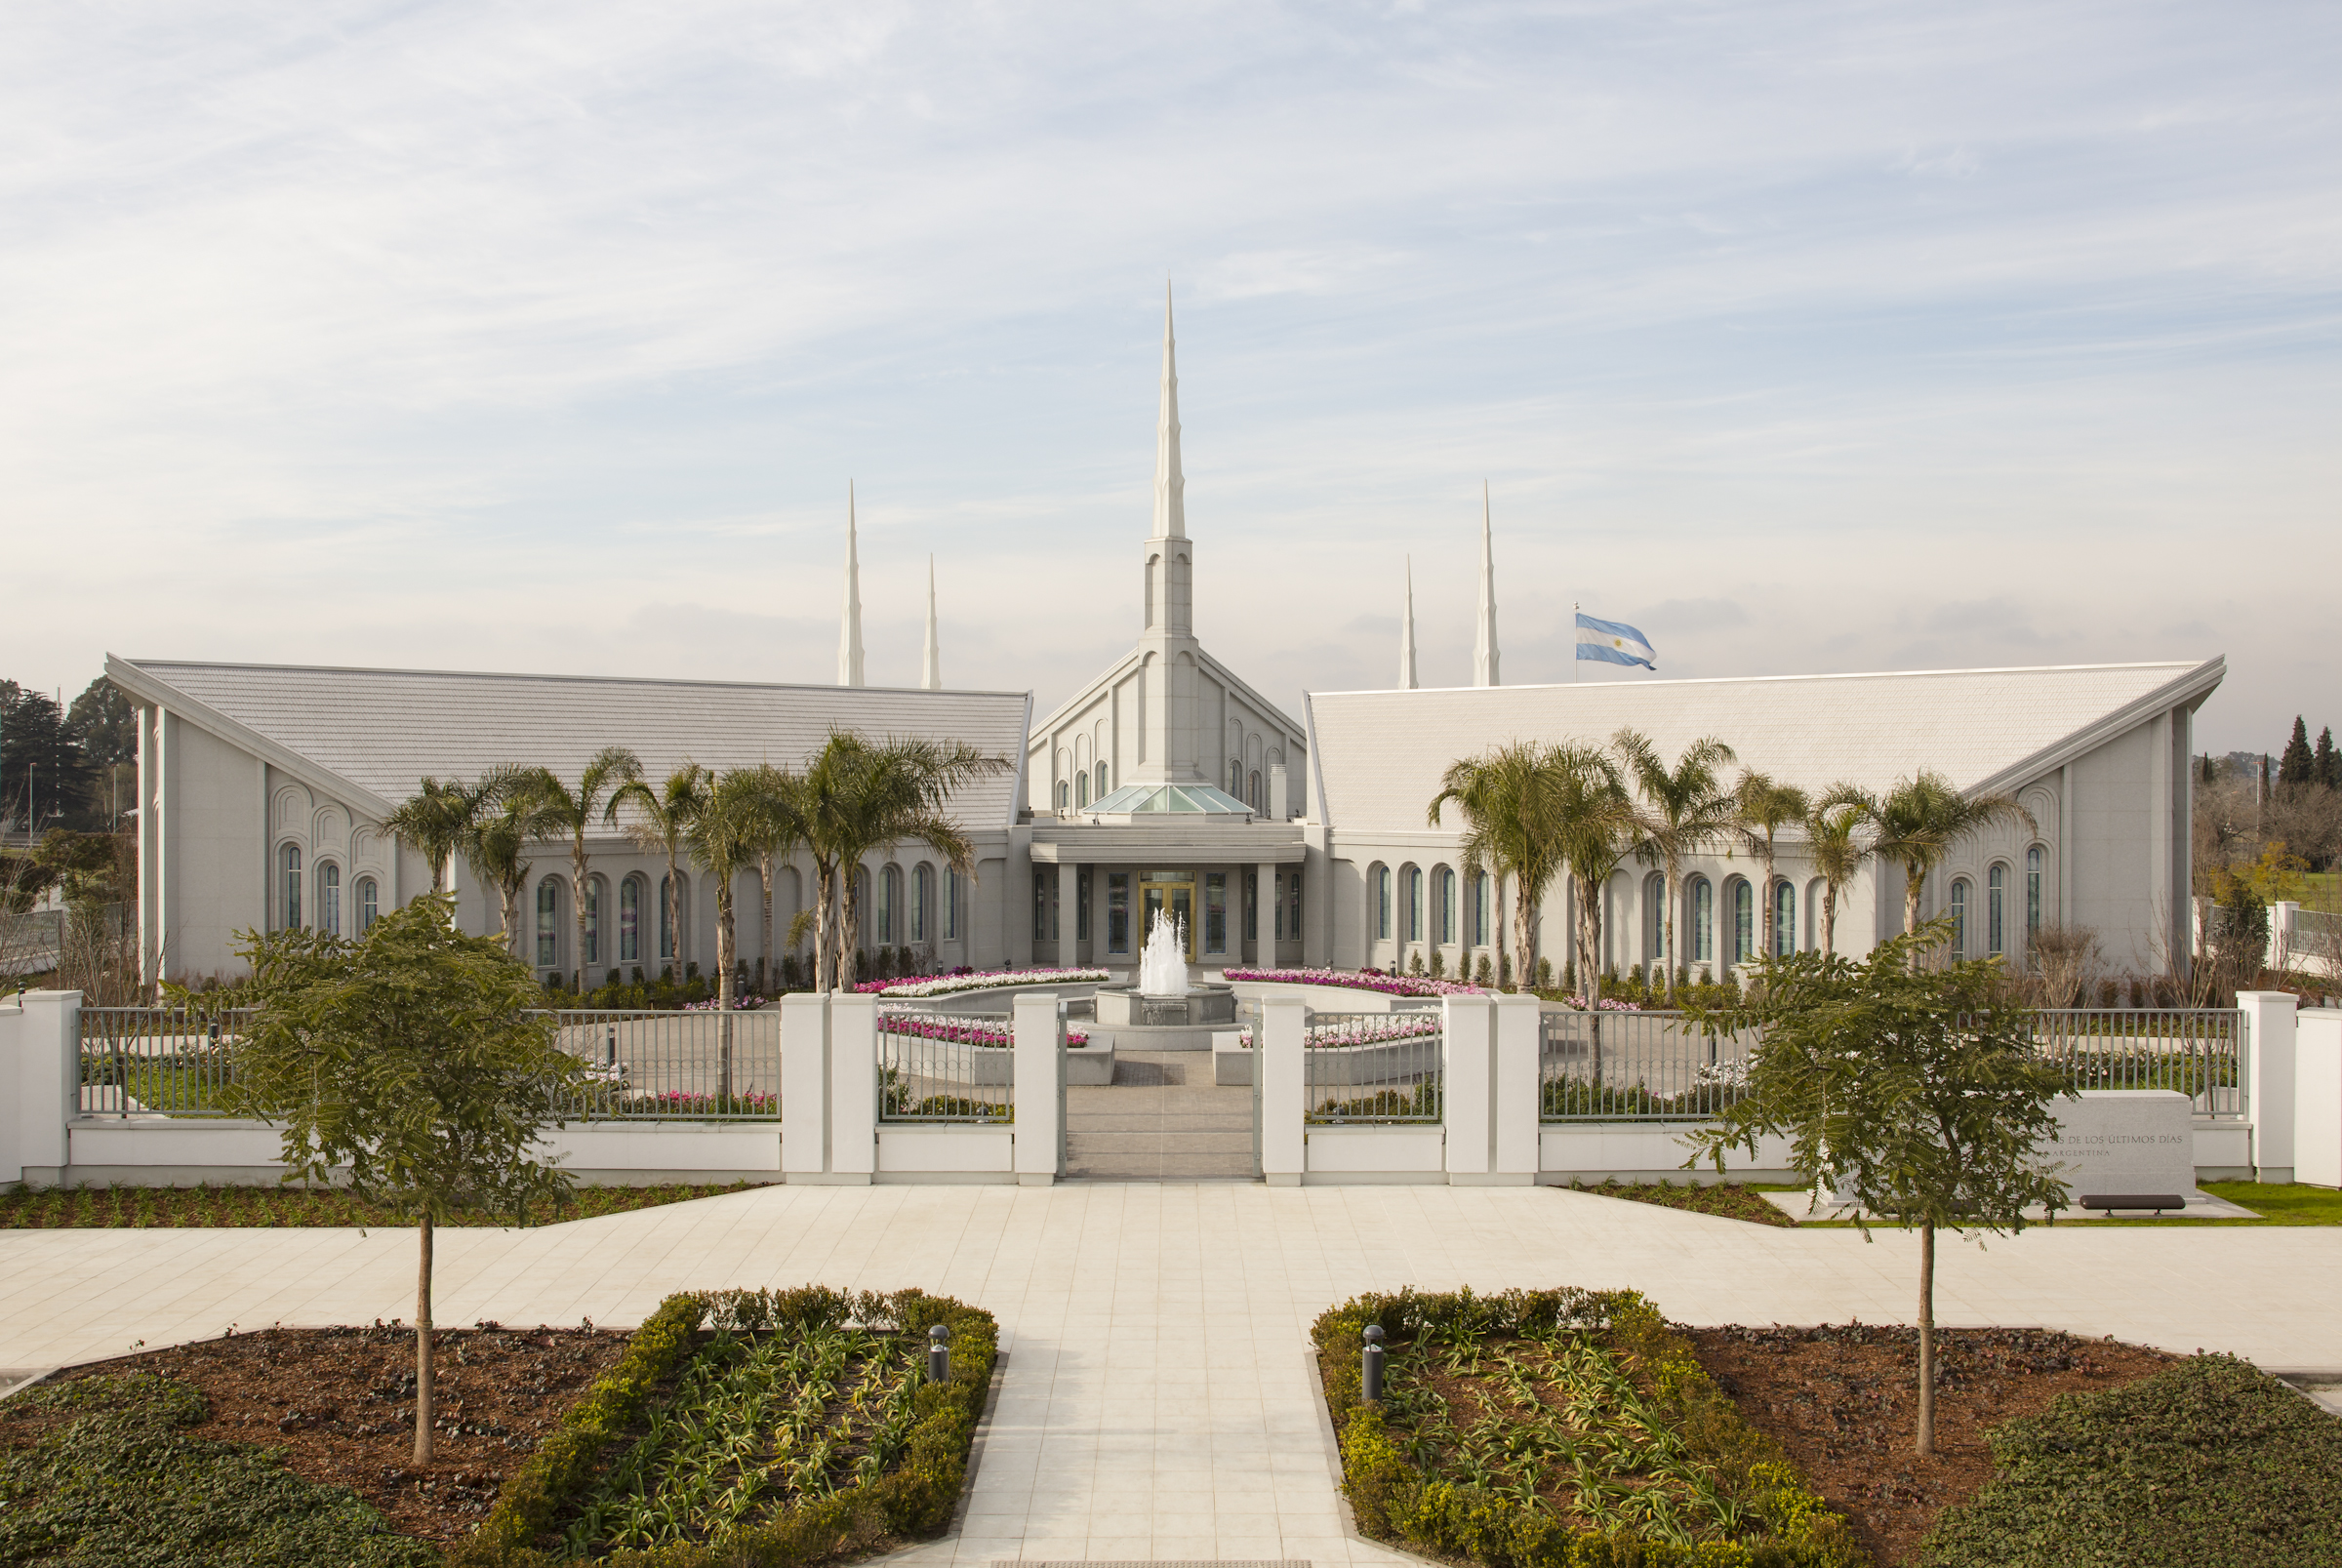 The Buenos Aires Argentina Temple, a gray building with a peaked roof on top and six tall spires around it.